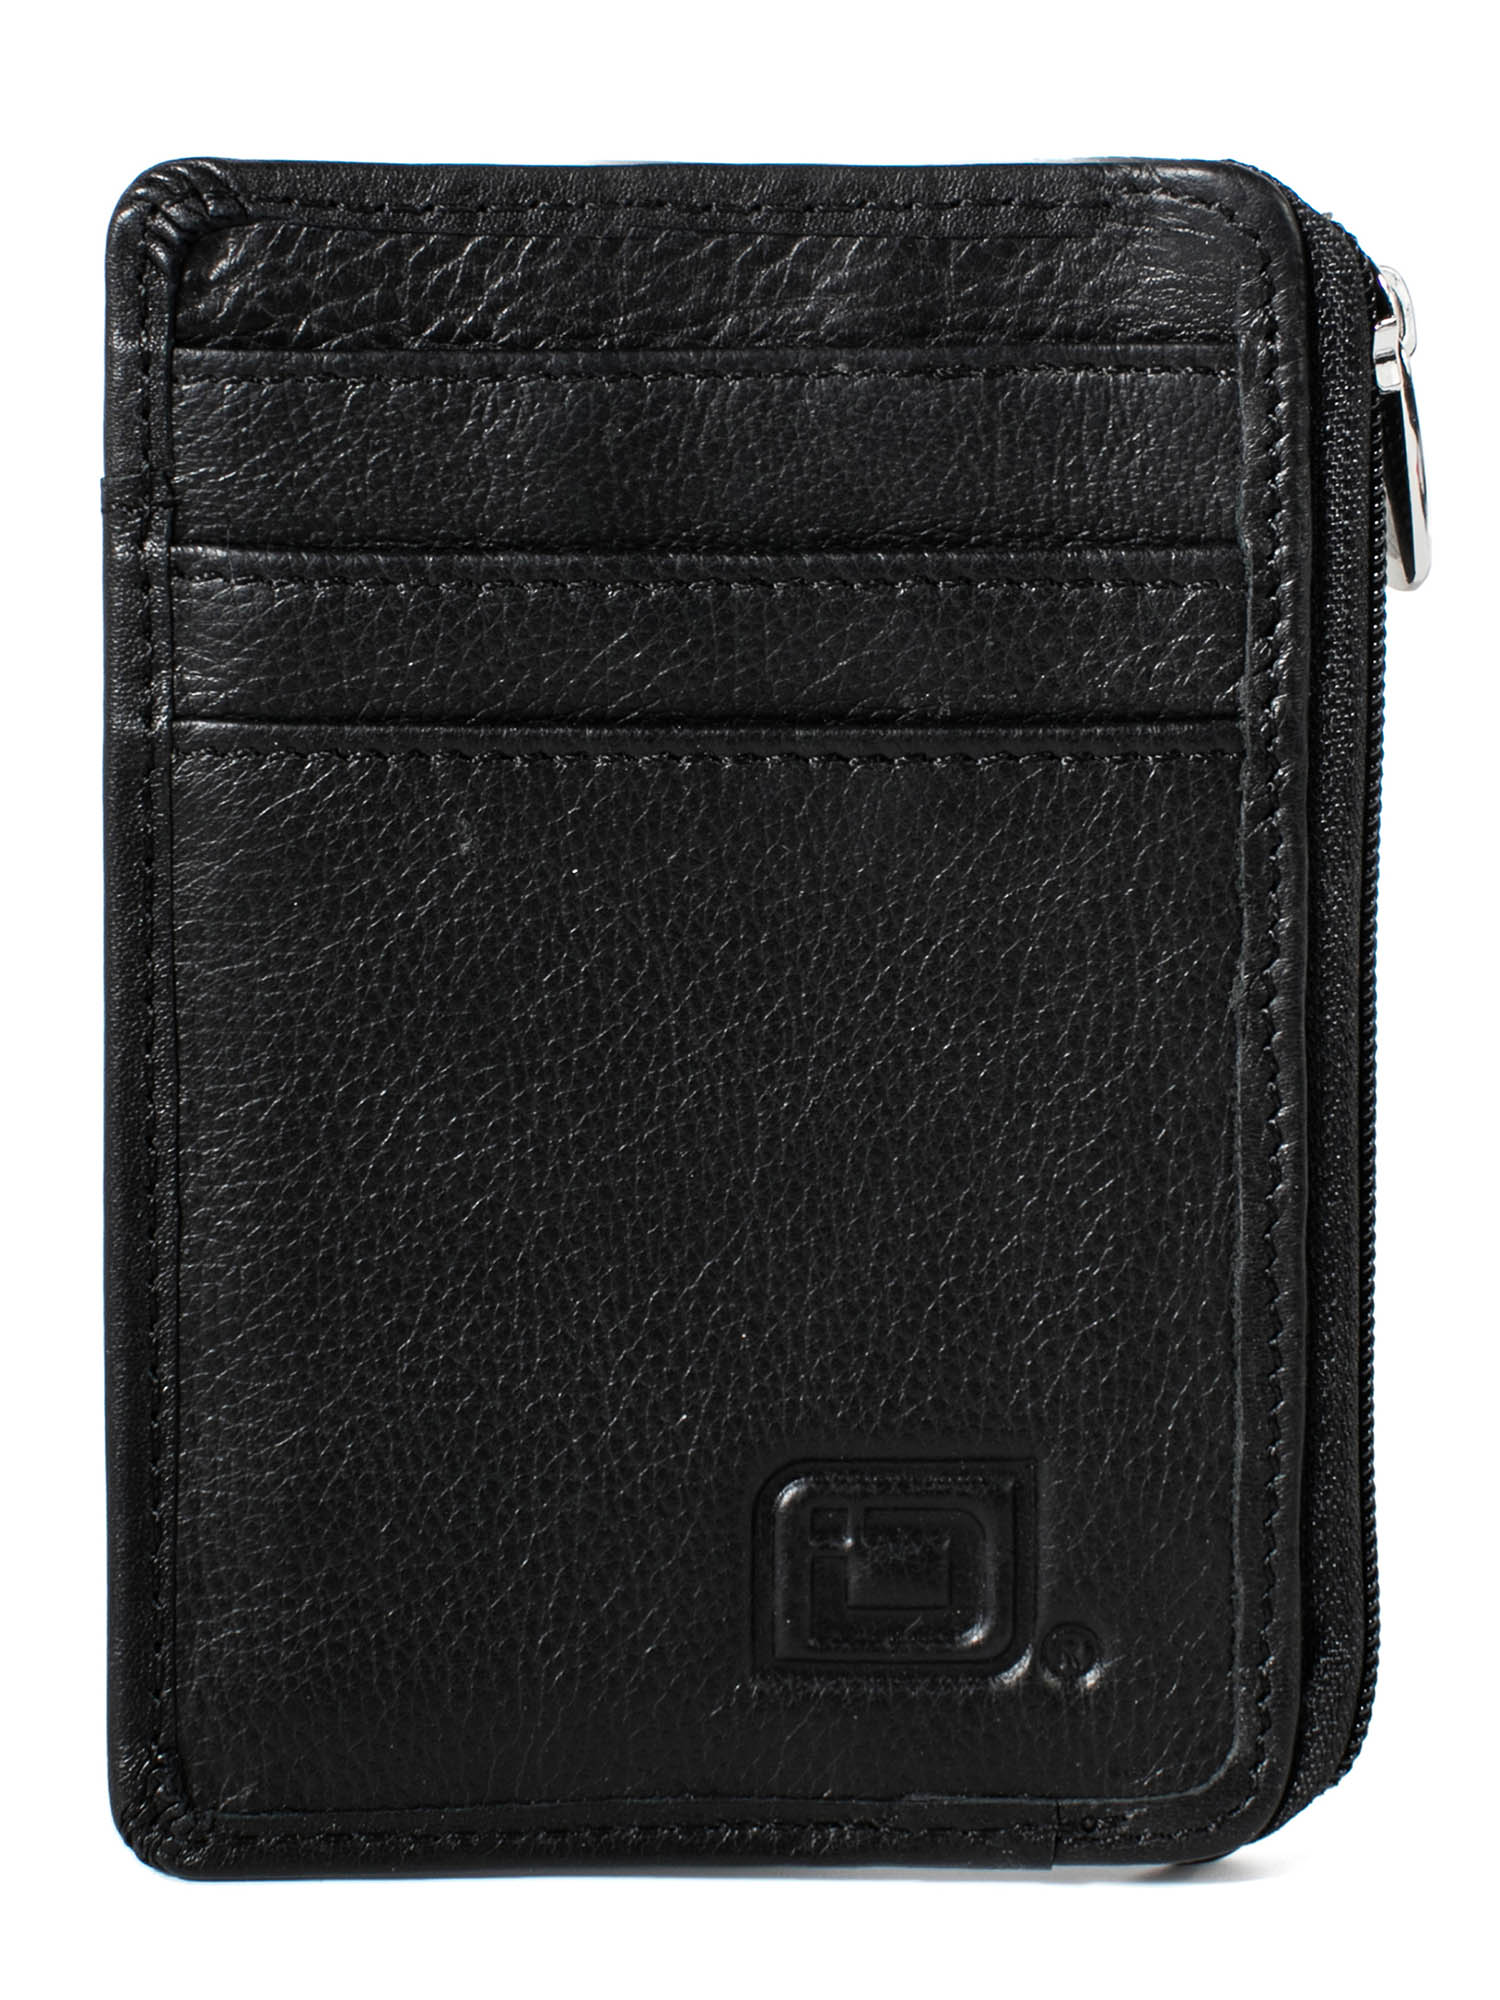 ID Stronghold RFID Wallet Mini for Men and Women - Genuine Leather - Best RFID Blocking Slim Wallet to Stop Electronic Pickpocketing - Minimalist Wallet - Black - image 3 of 6